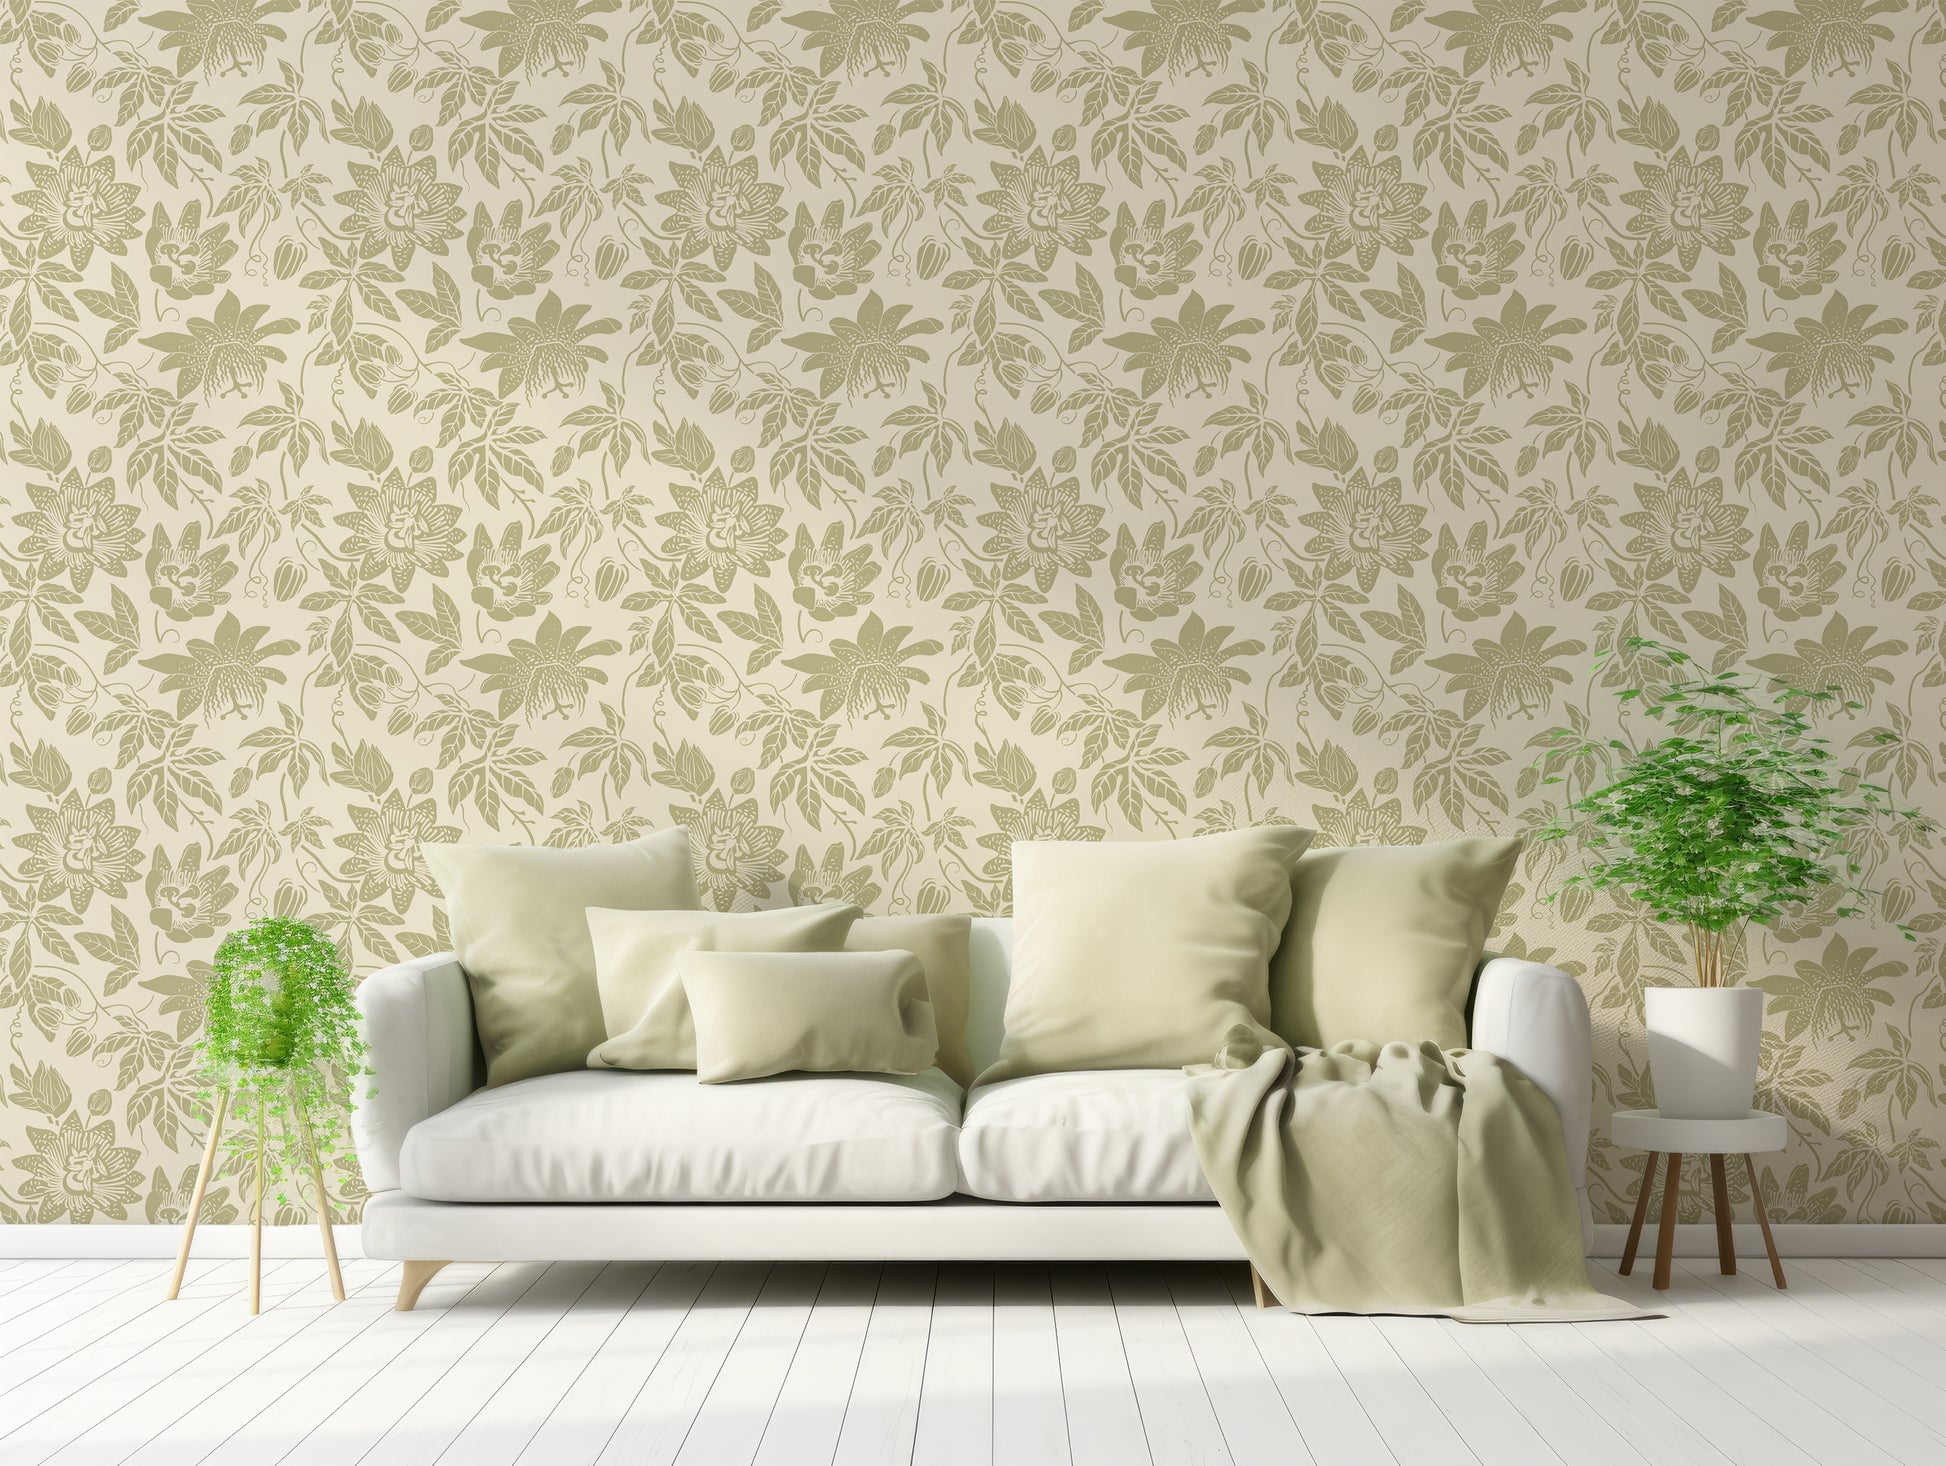 Thea Wallpaper In Pastel Themed Living Room With Pastel Green Sofa And Green Plants